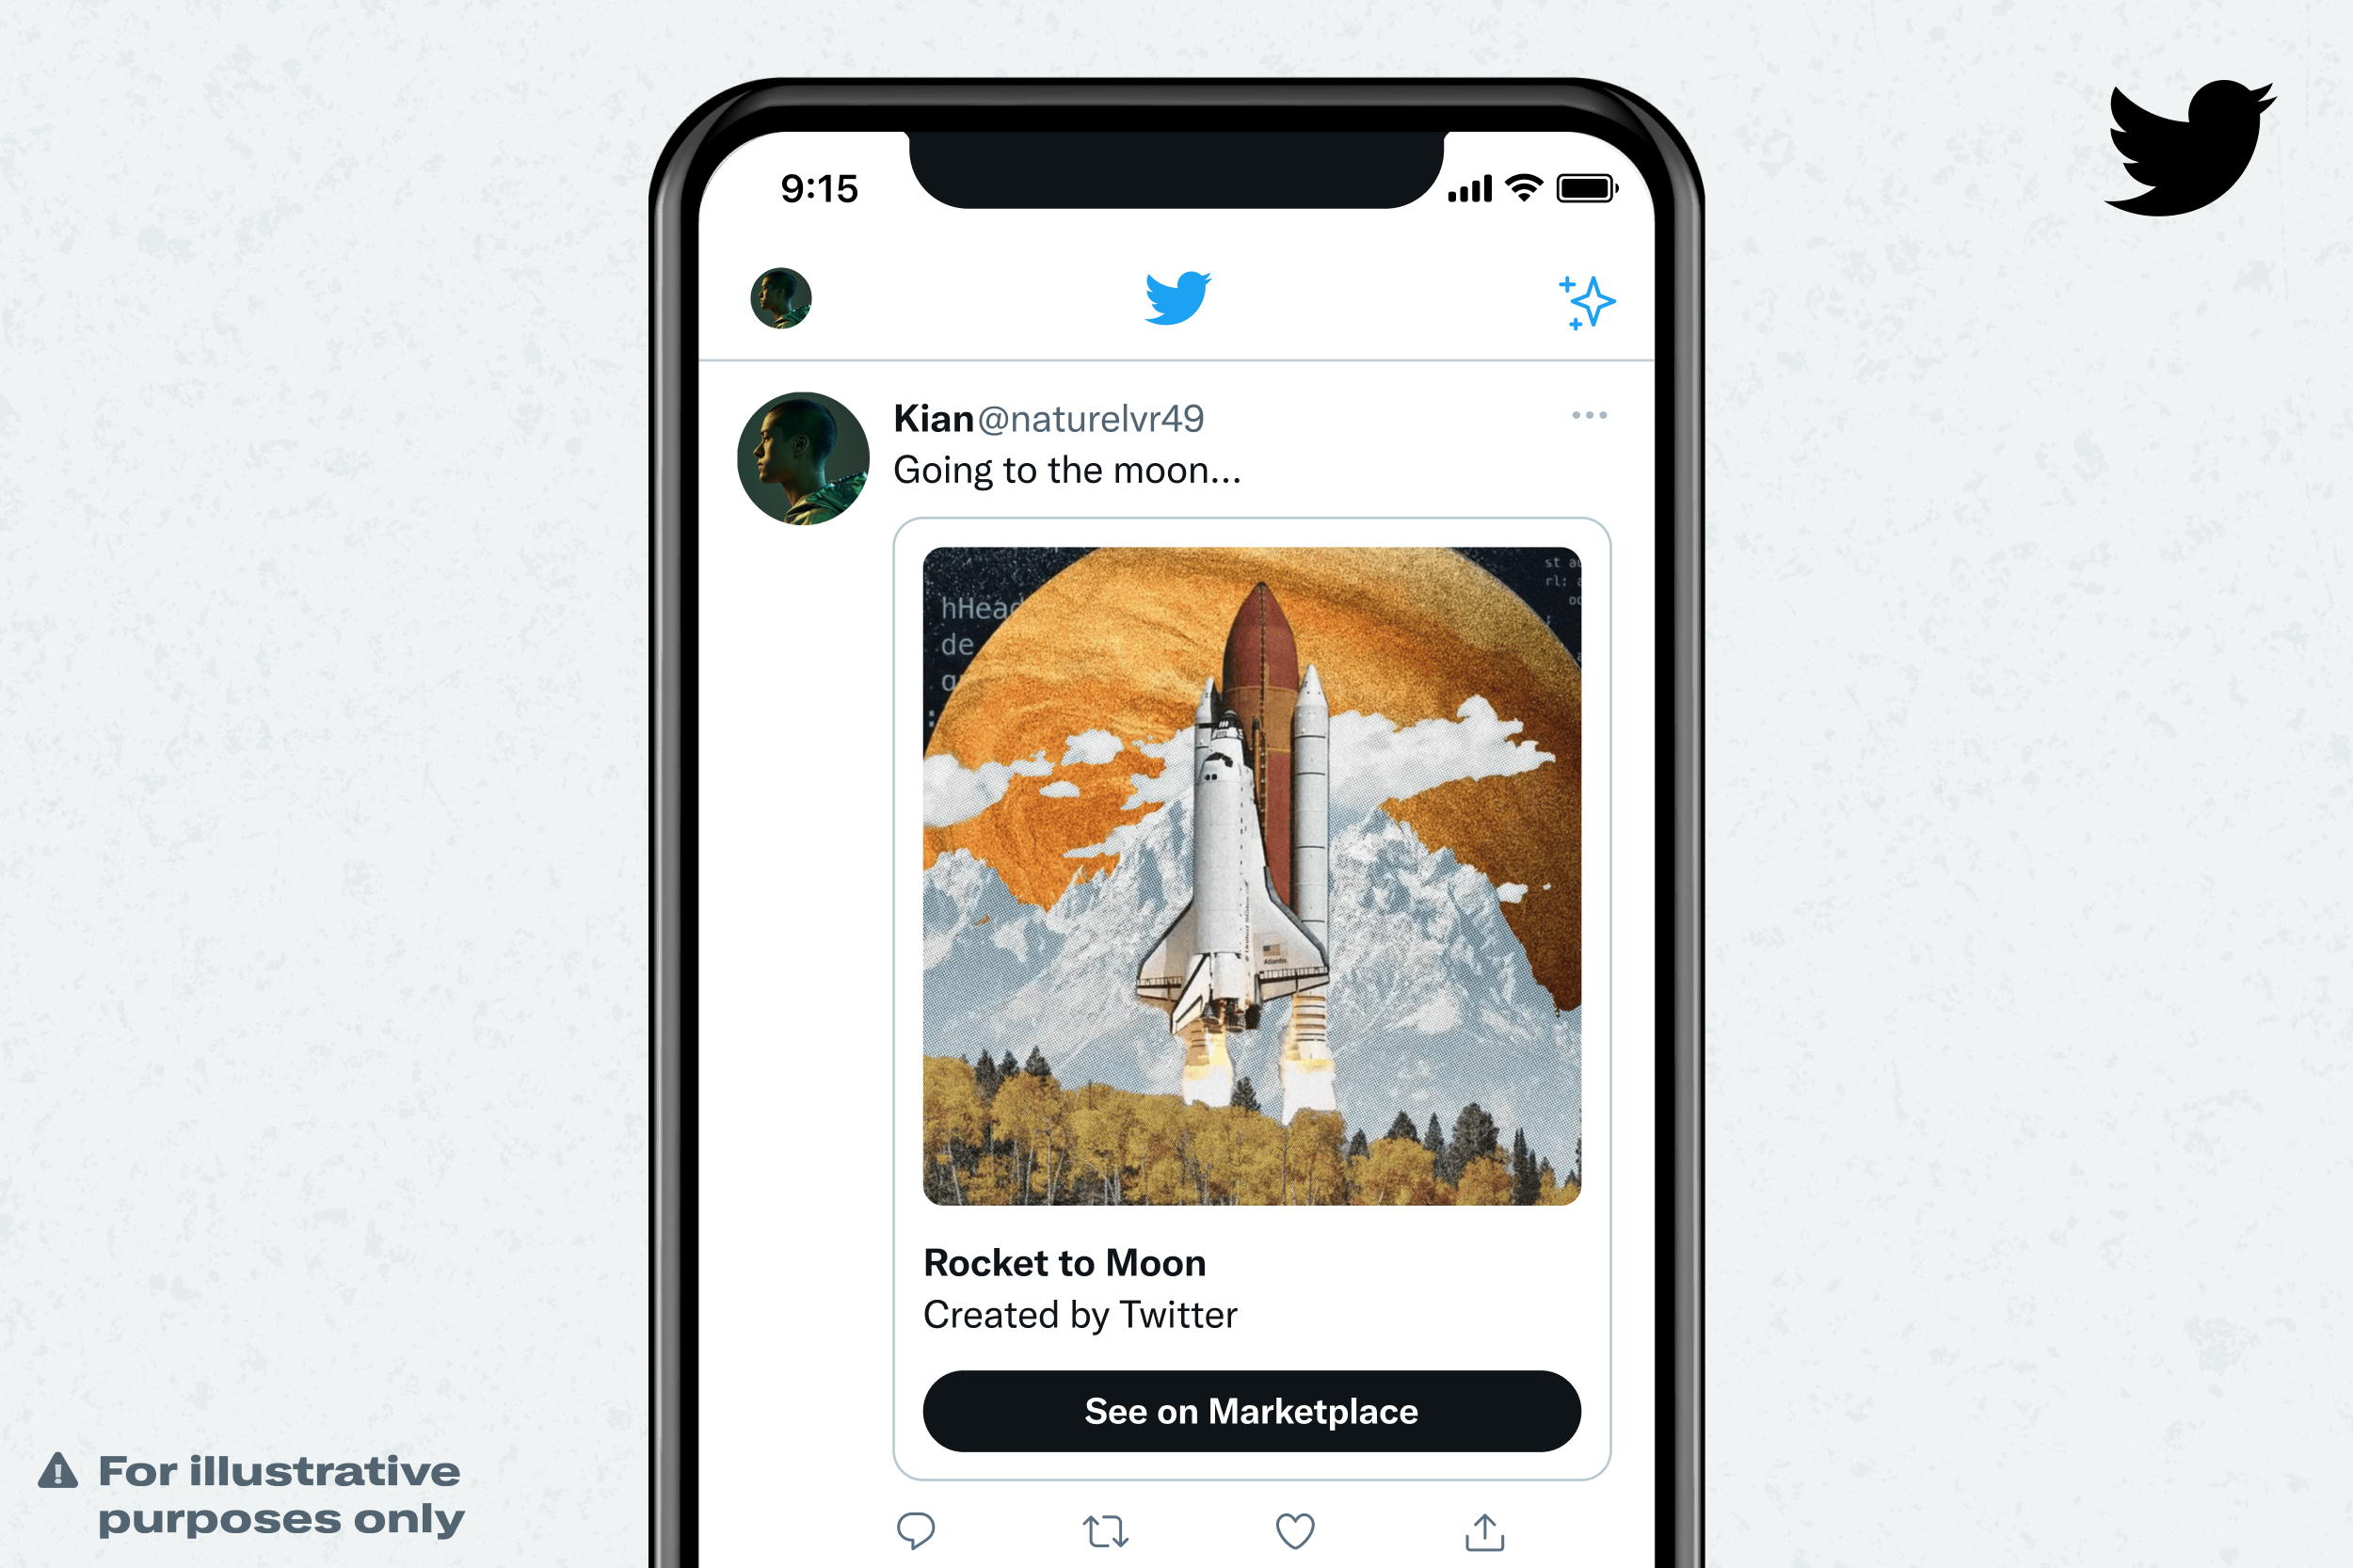 Twitter Launches “NFT Tweet Tiles” To “Influence” Your Social Media Experience